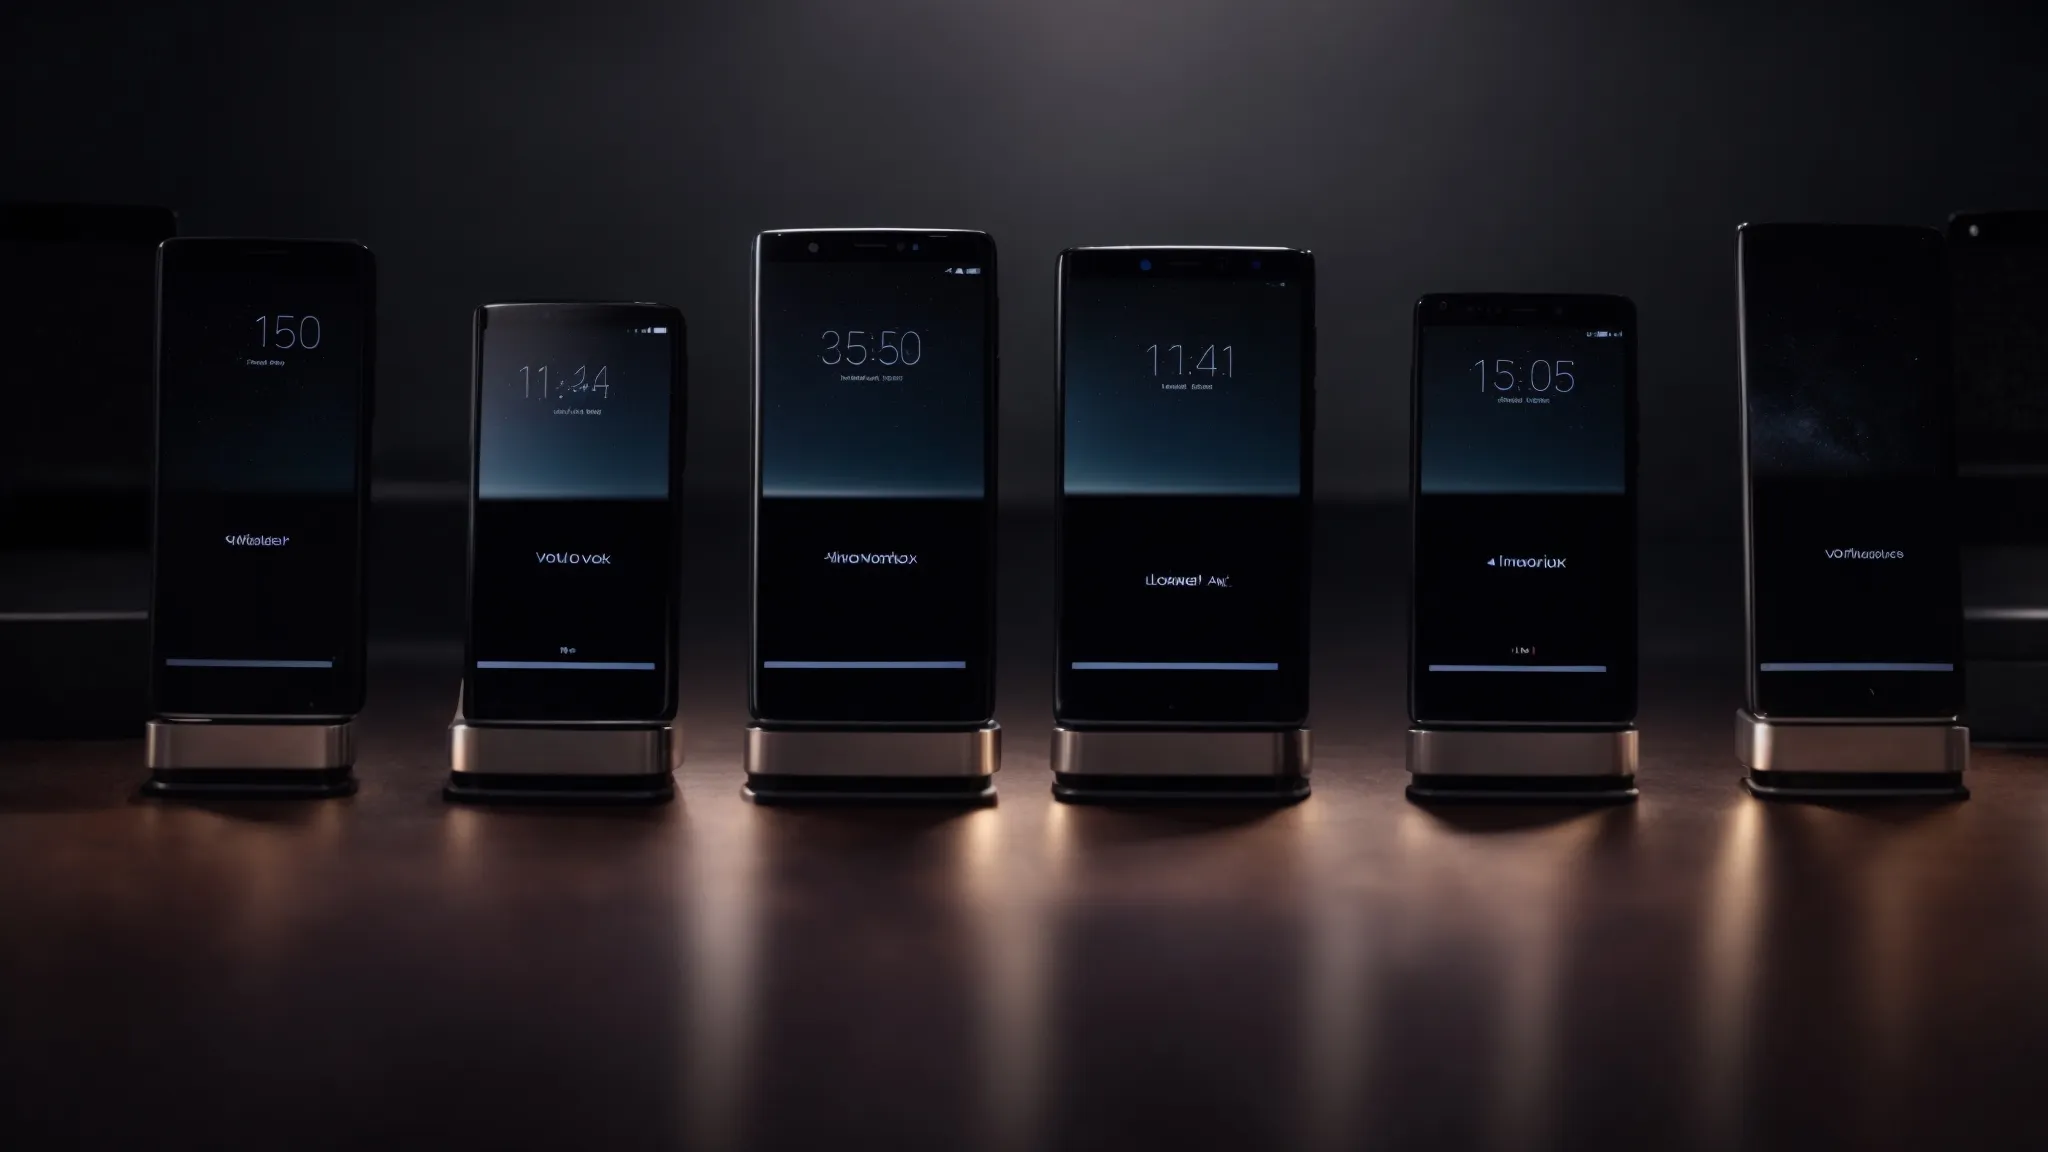 a row of sleek, black vortex smartphones arranged neatly on a reflective surface, each glowing subtly with the welcome screen.